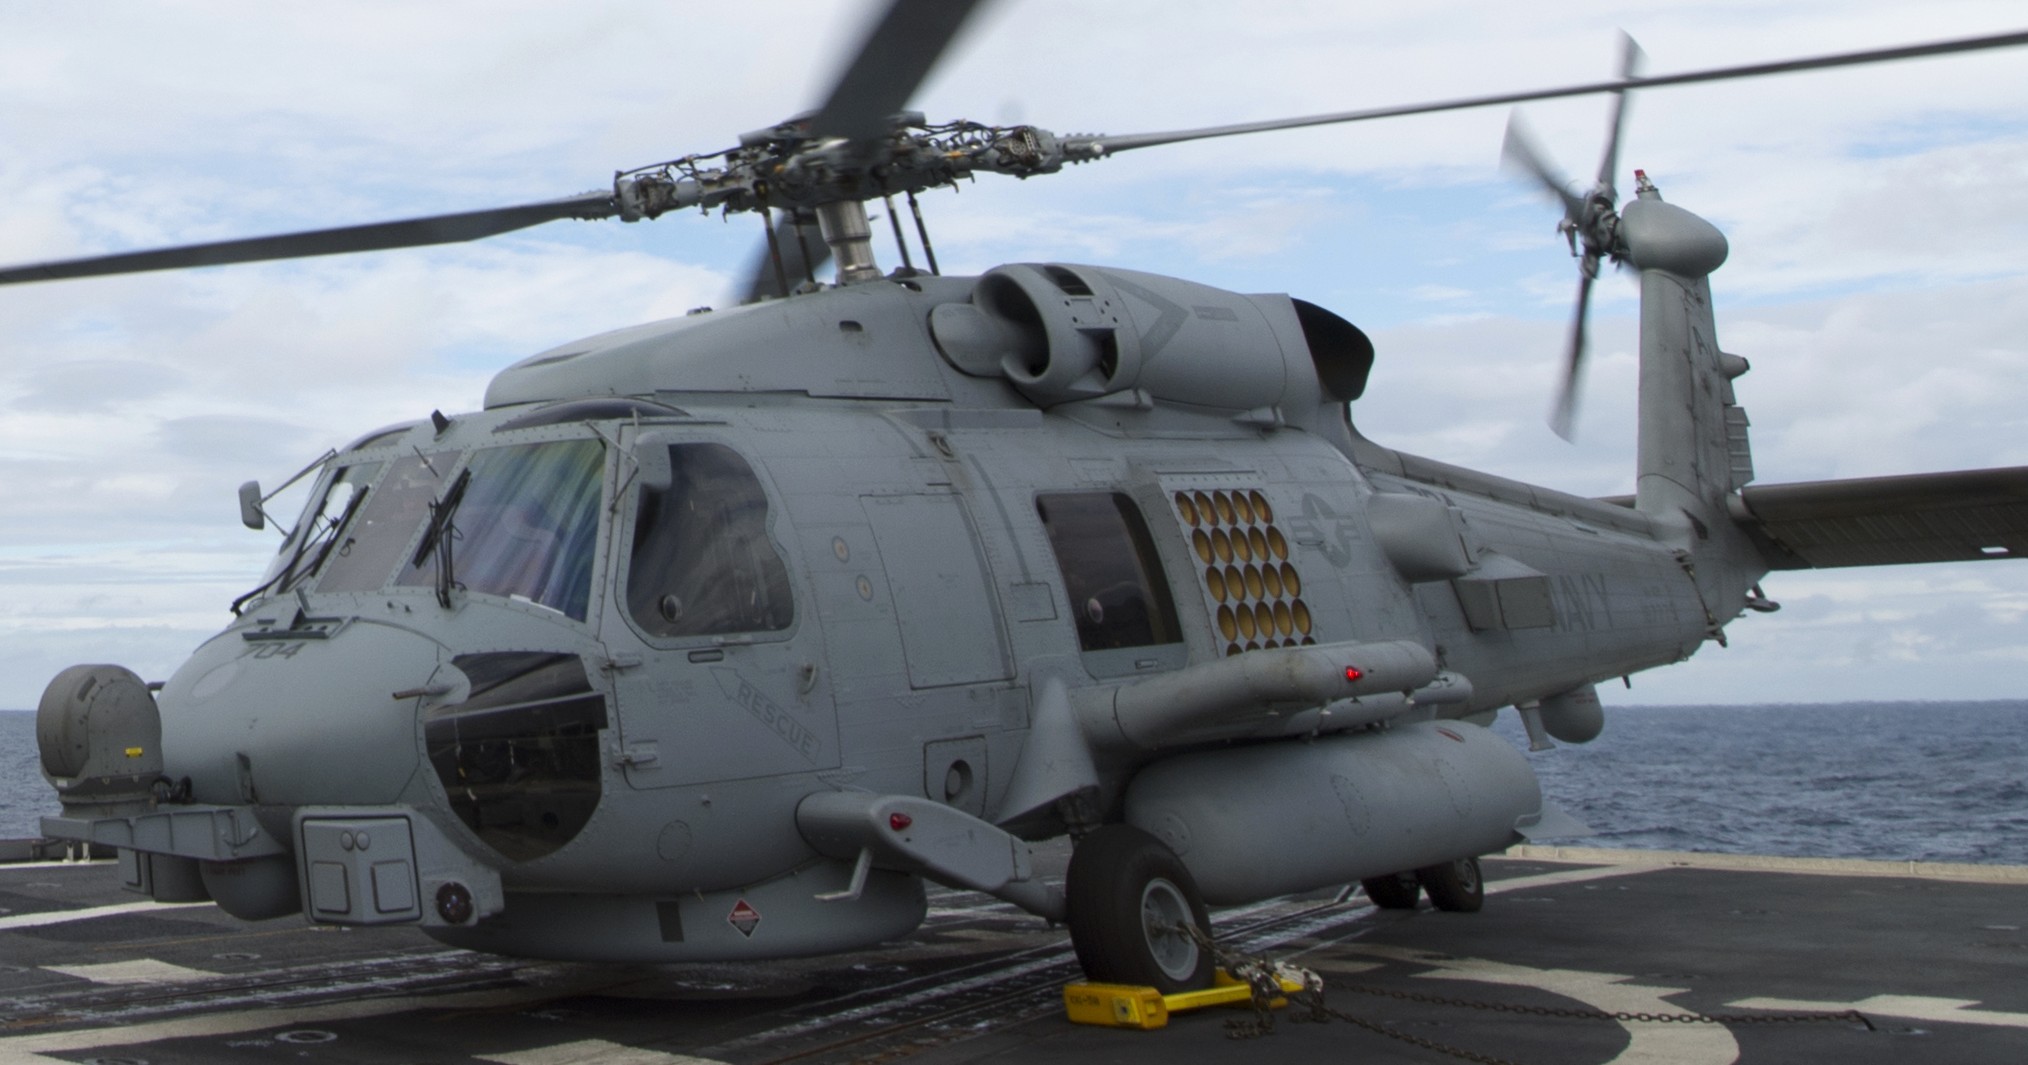 hsm-70 spartans helicopter maritime strike squadron mh-60r seahawk 2014 95